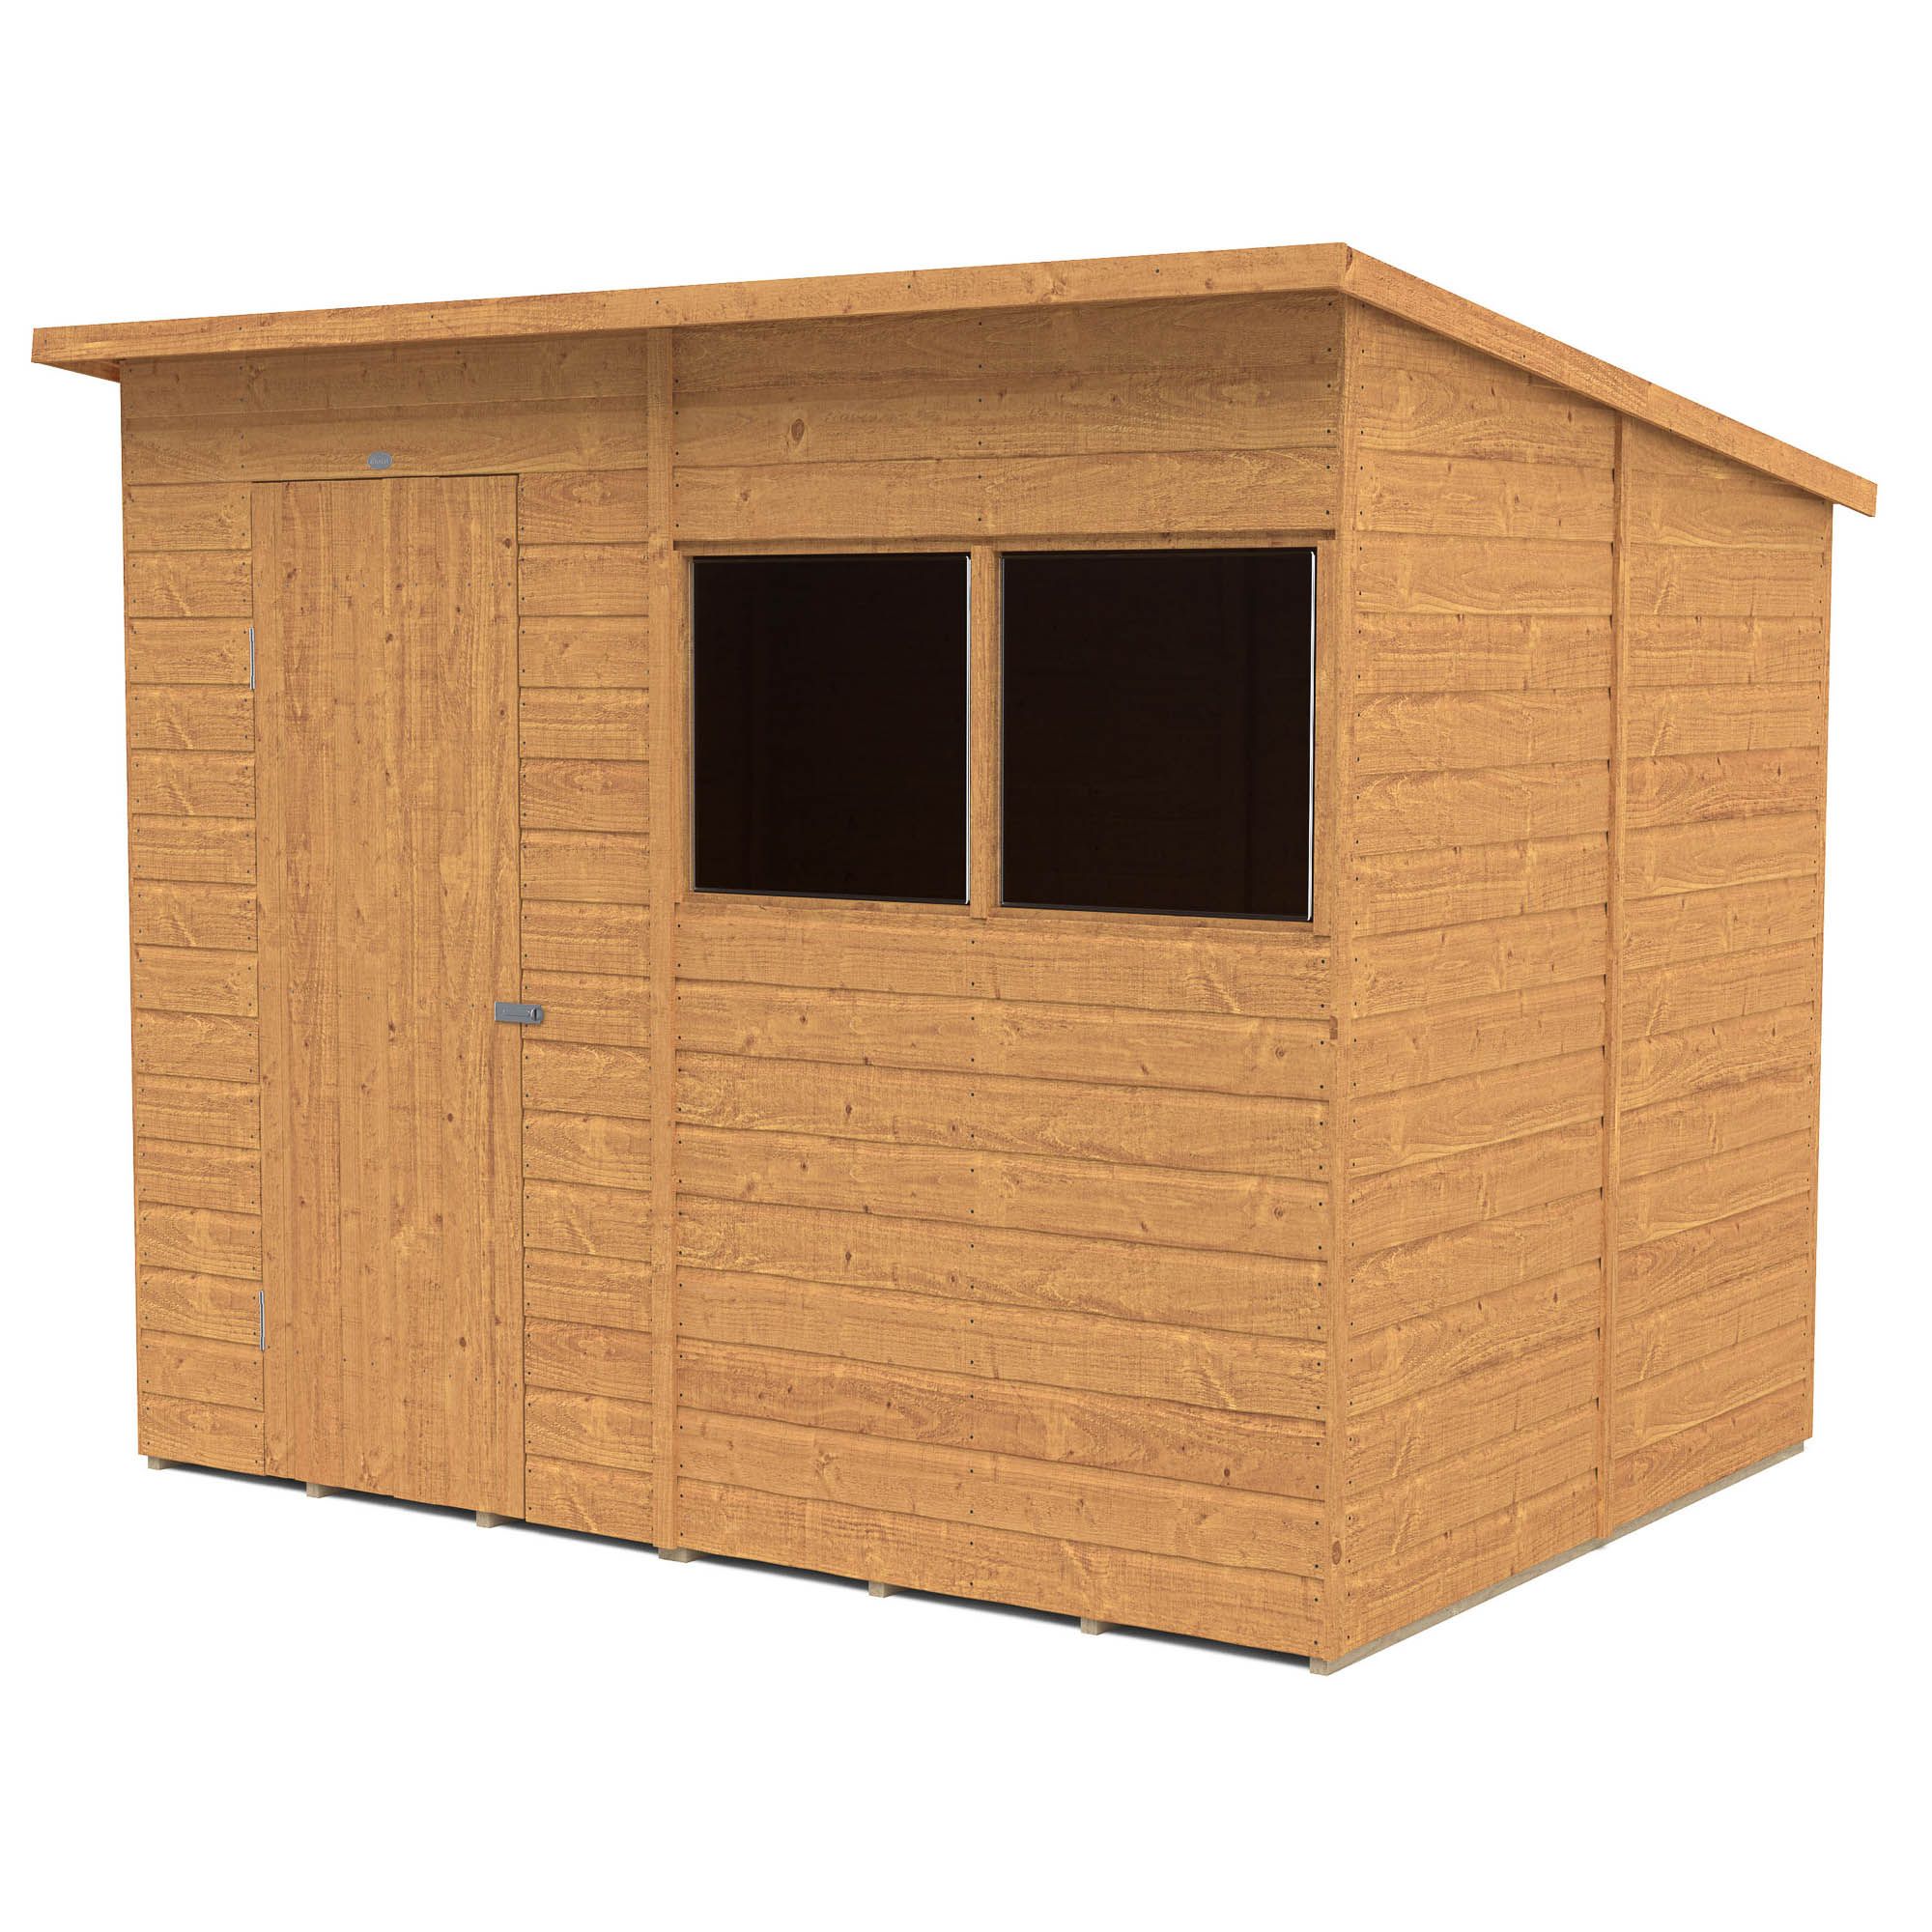 Forest Garden Shiplap 8x6 ft Pent Wooden Shed with floor & 2 windows - Assembly service included